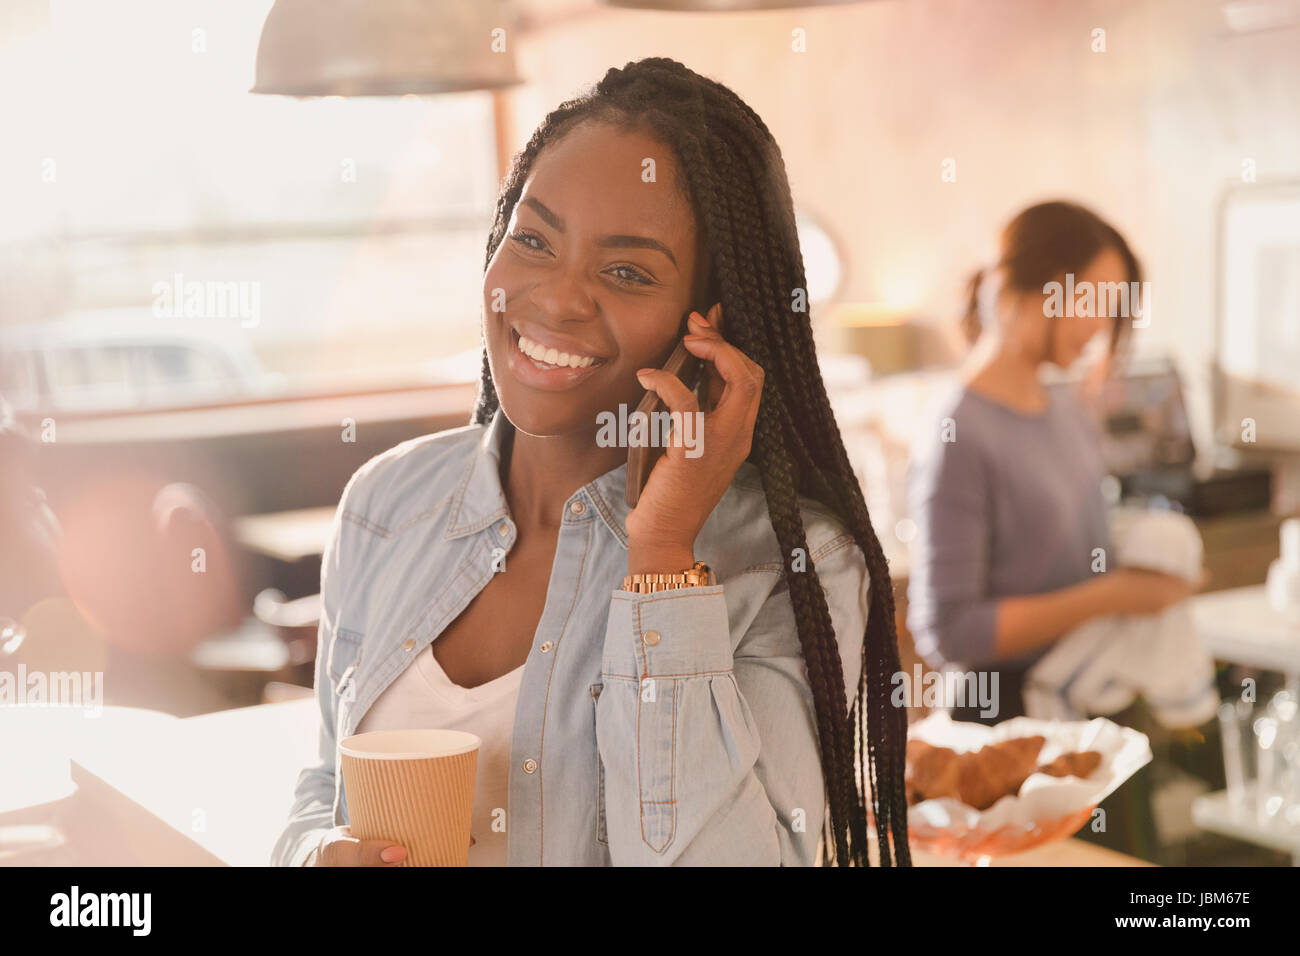 Smiling woman talking on cell phone and drinking coffee in cafe Stock Photo